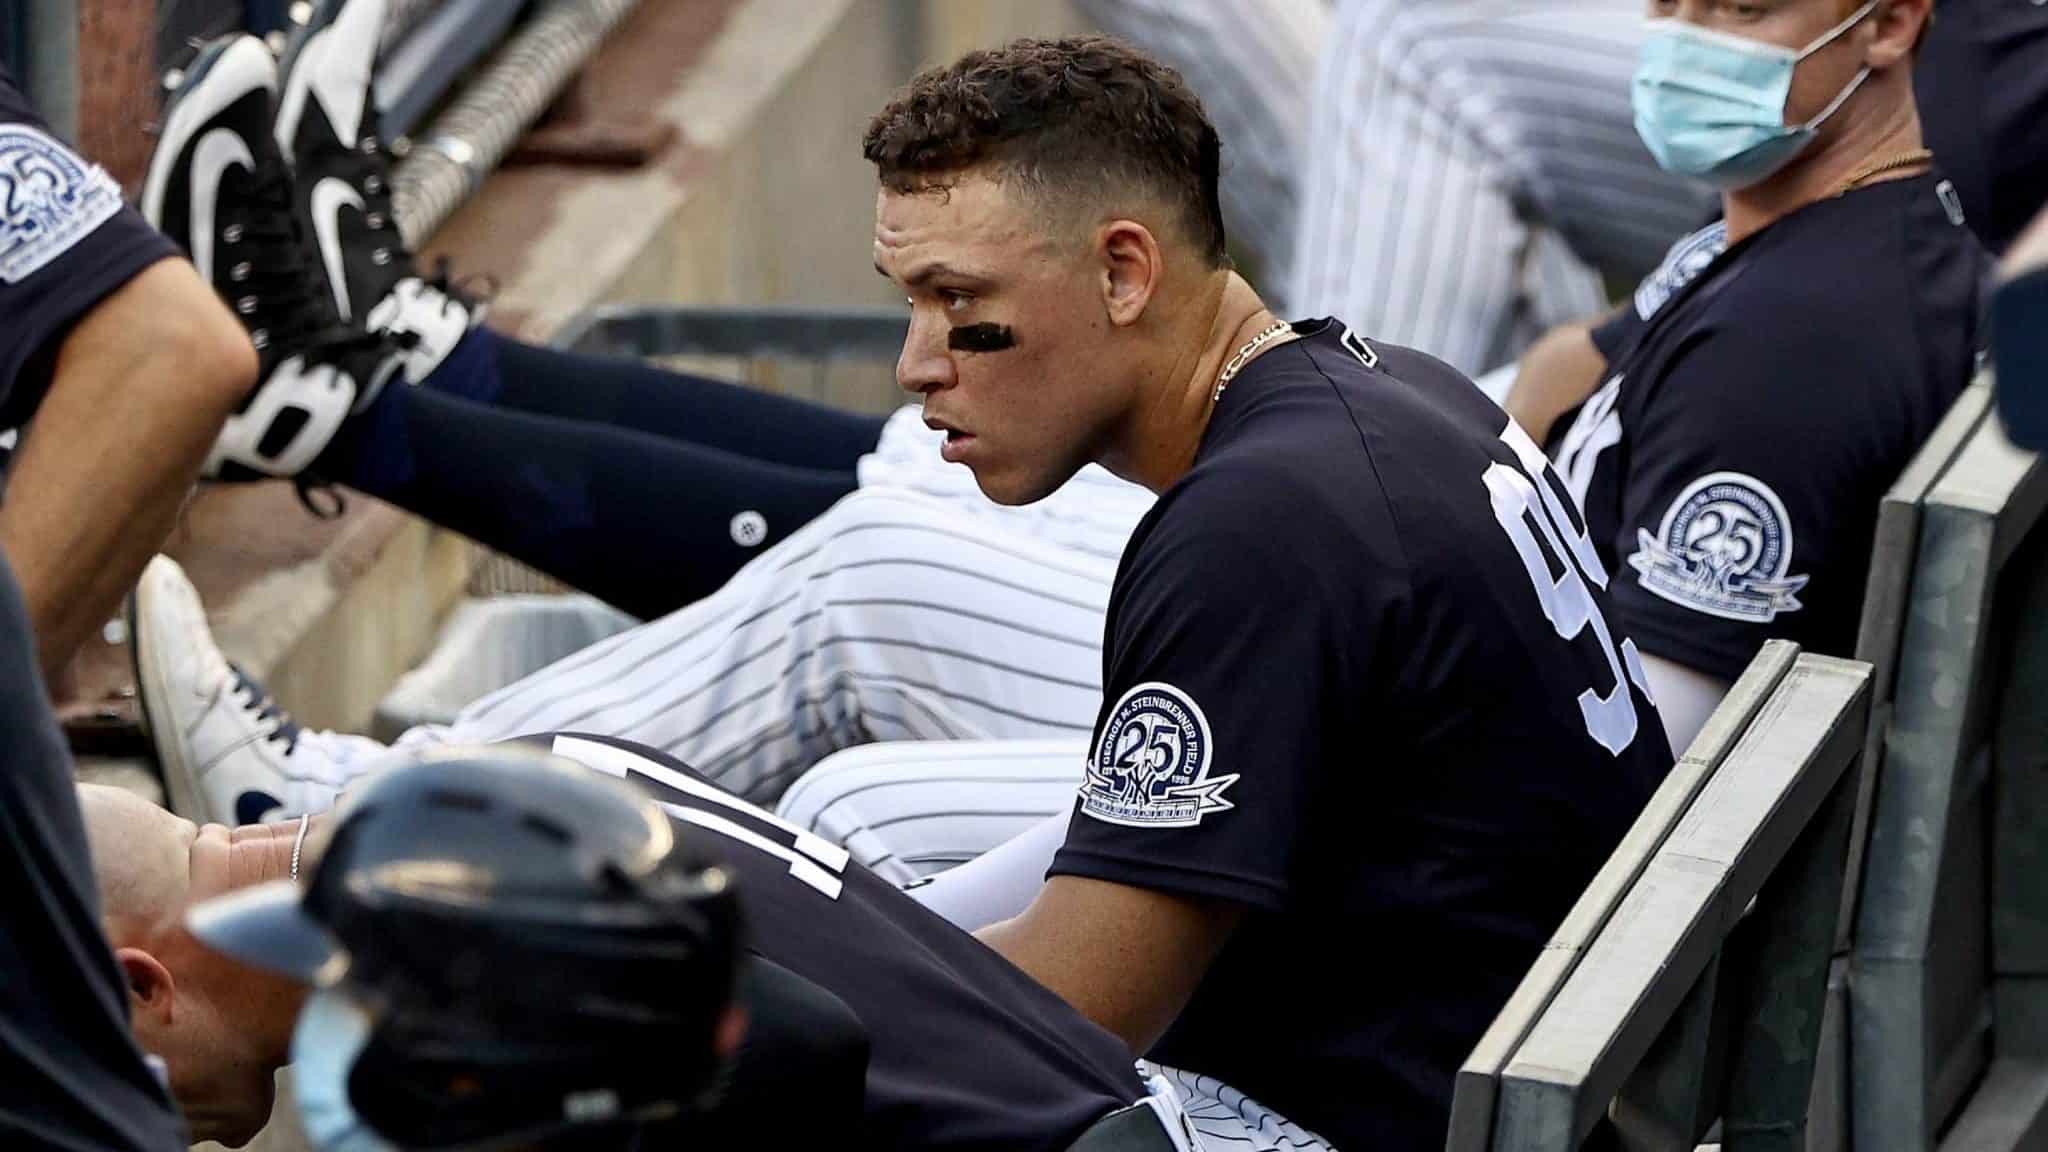 NEW YORK, NEW YORK - JULY 20: Aaron Judge #99 of the New York Yankees looks on from the dugout in the bottom of the first inning against the Philadelphia Phillies during a Summer Camp game at Yankee Stadium on July 20, 2020 in the Bronx borough of New York City.